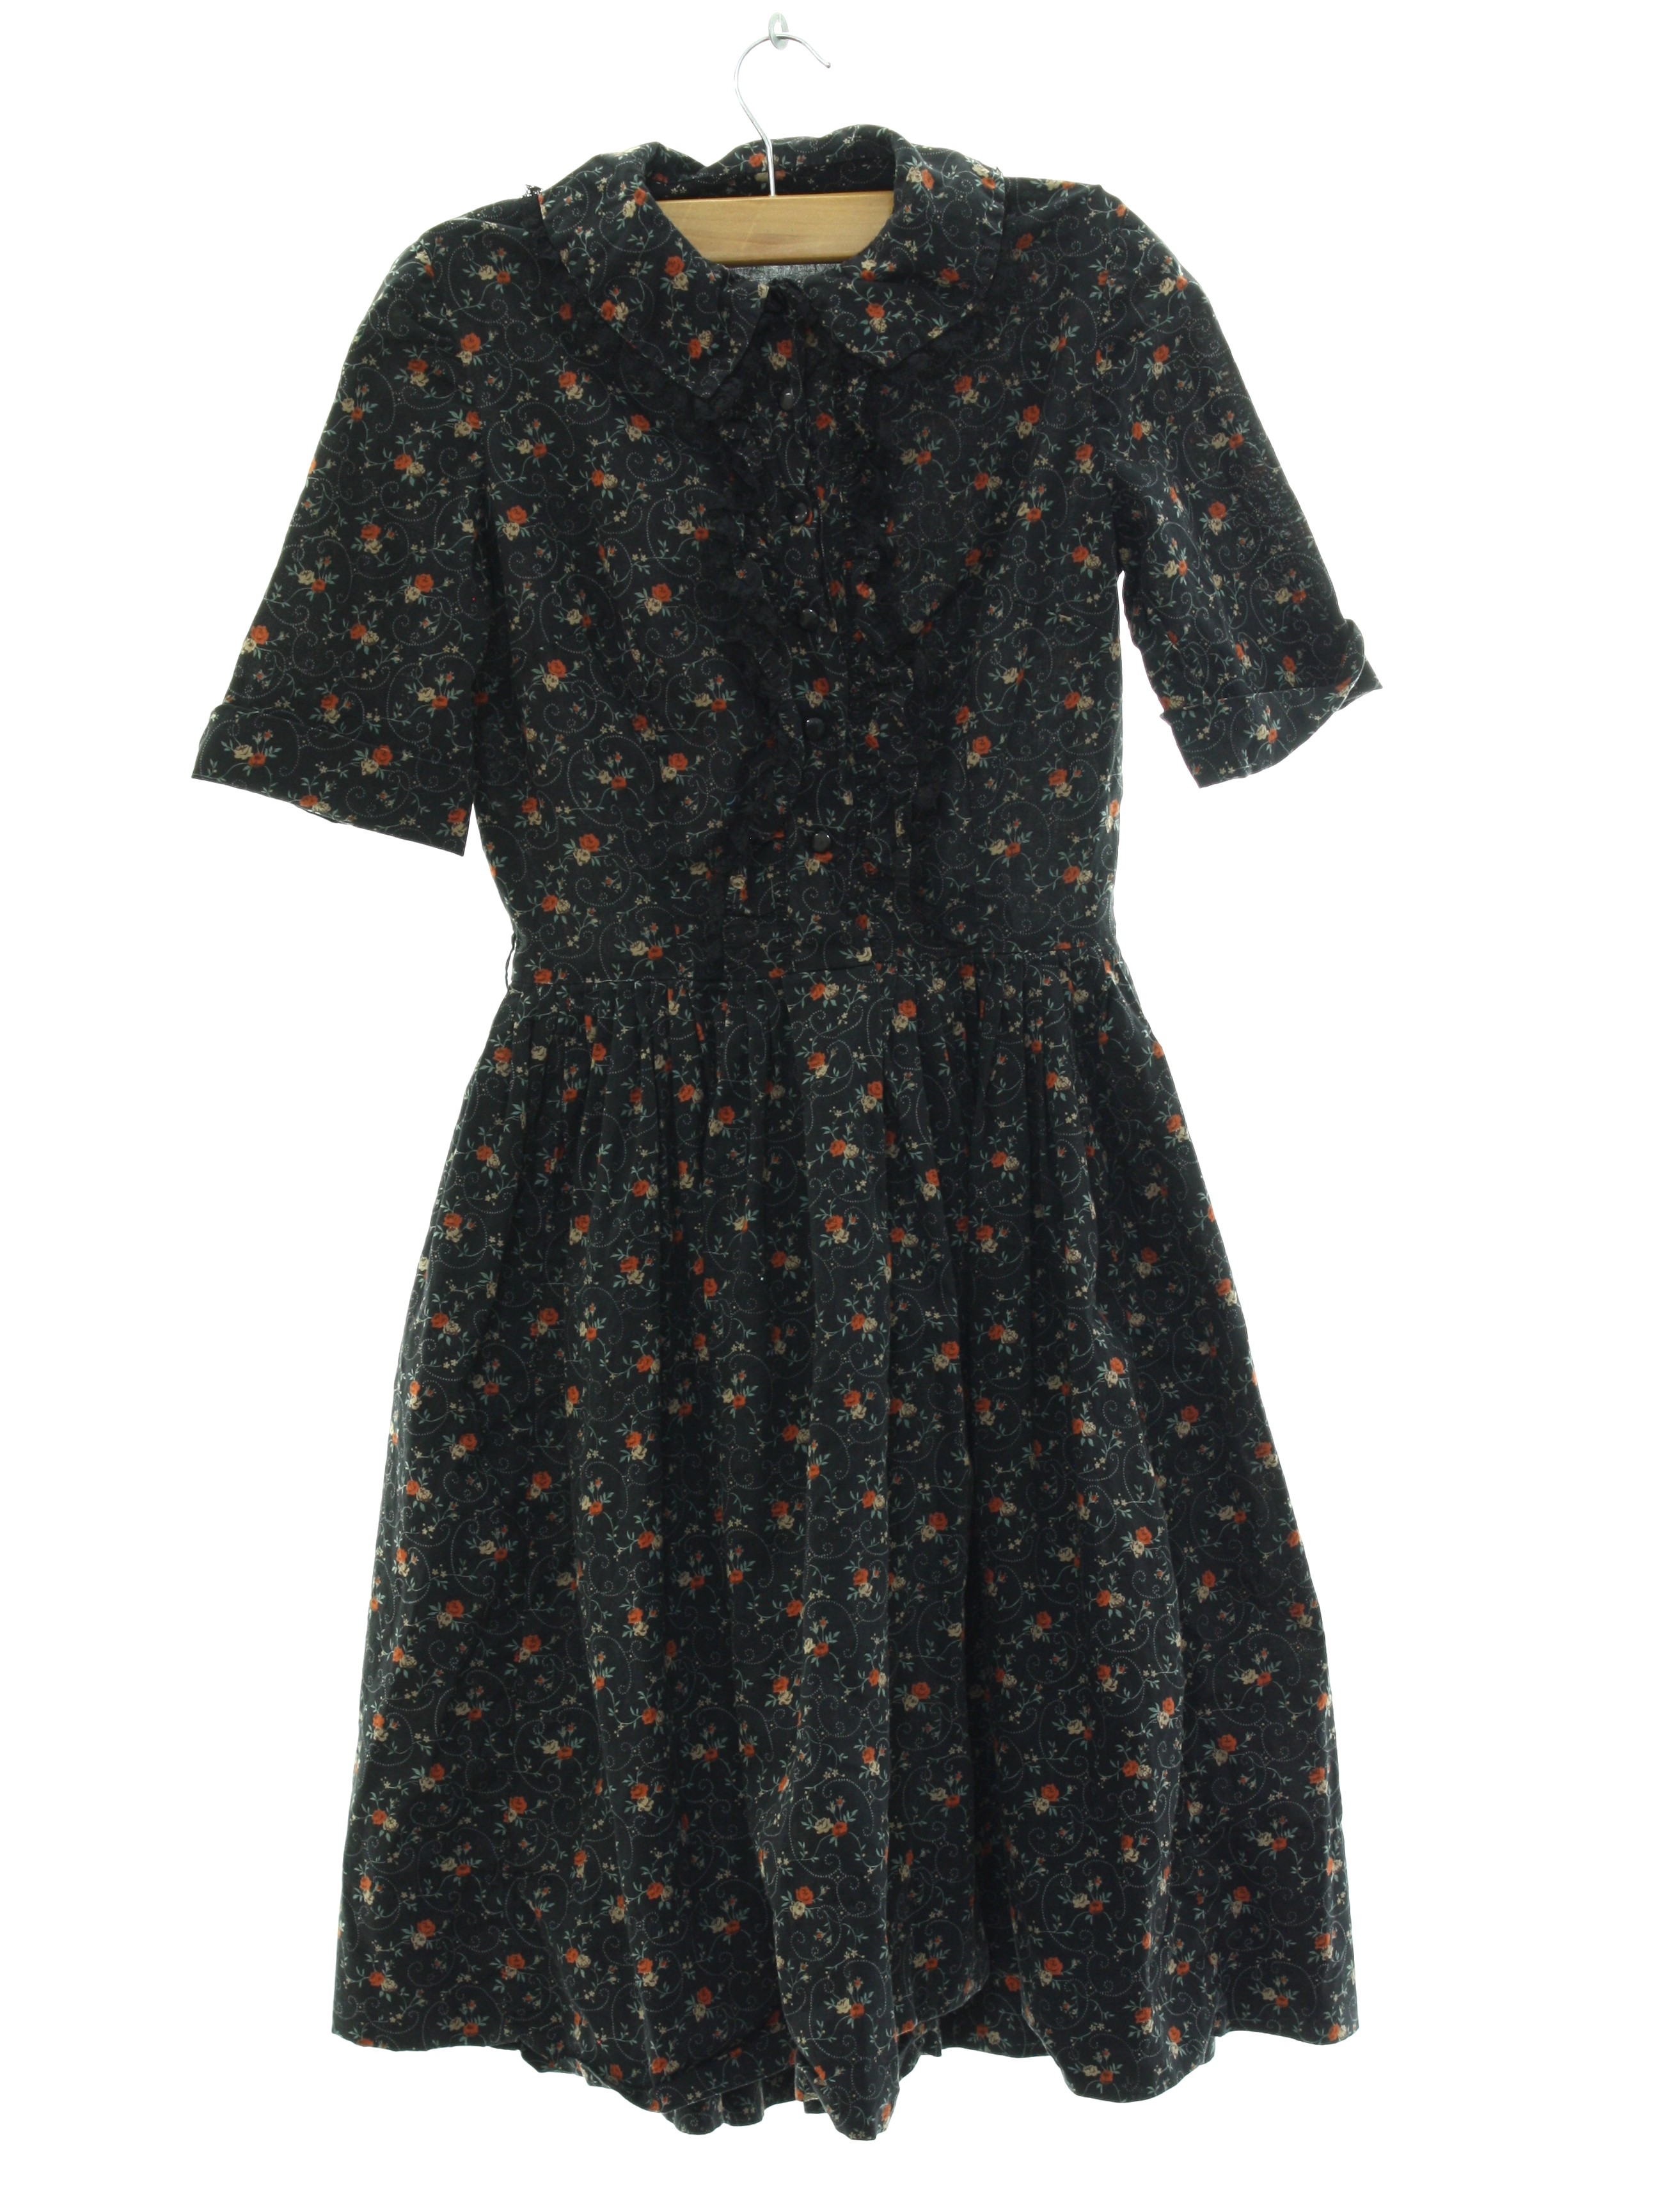 60s Dress: Late 60s or Early 70s -No Label- Girls black background ...